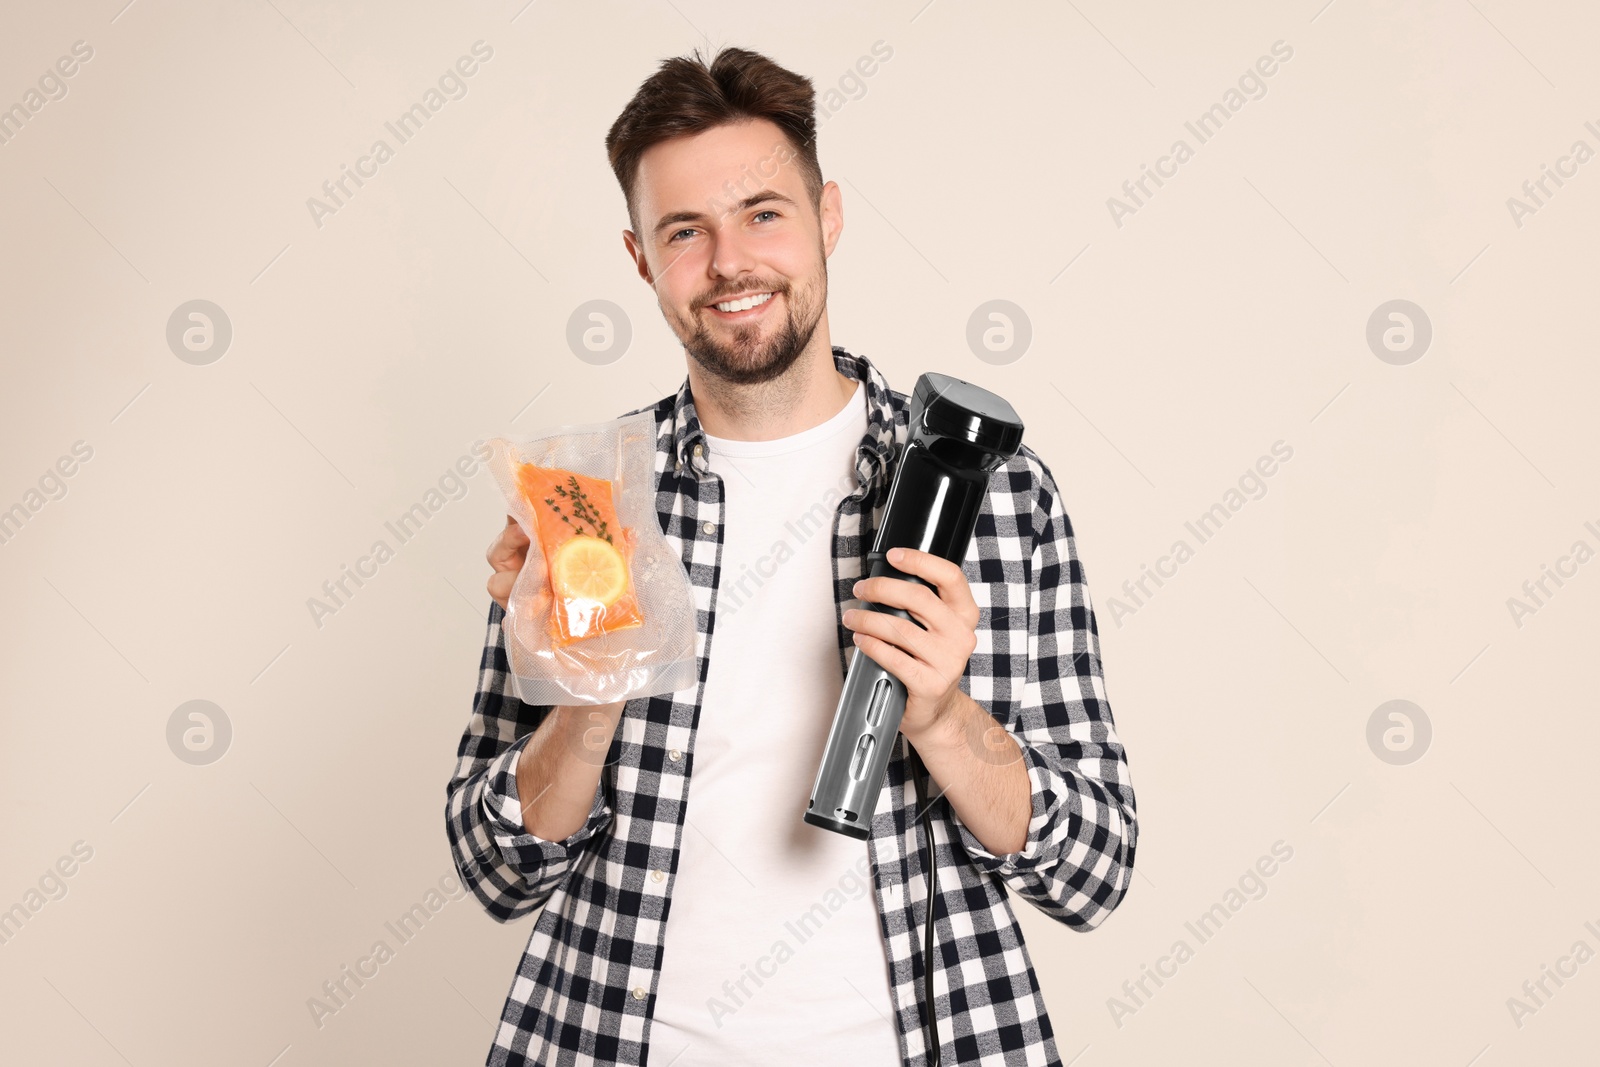 Photo of Smiling man holding sous vide cooker and salmon in vacuum pack on beige background